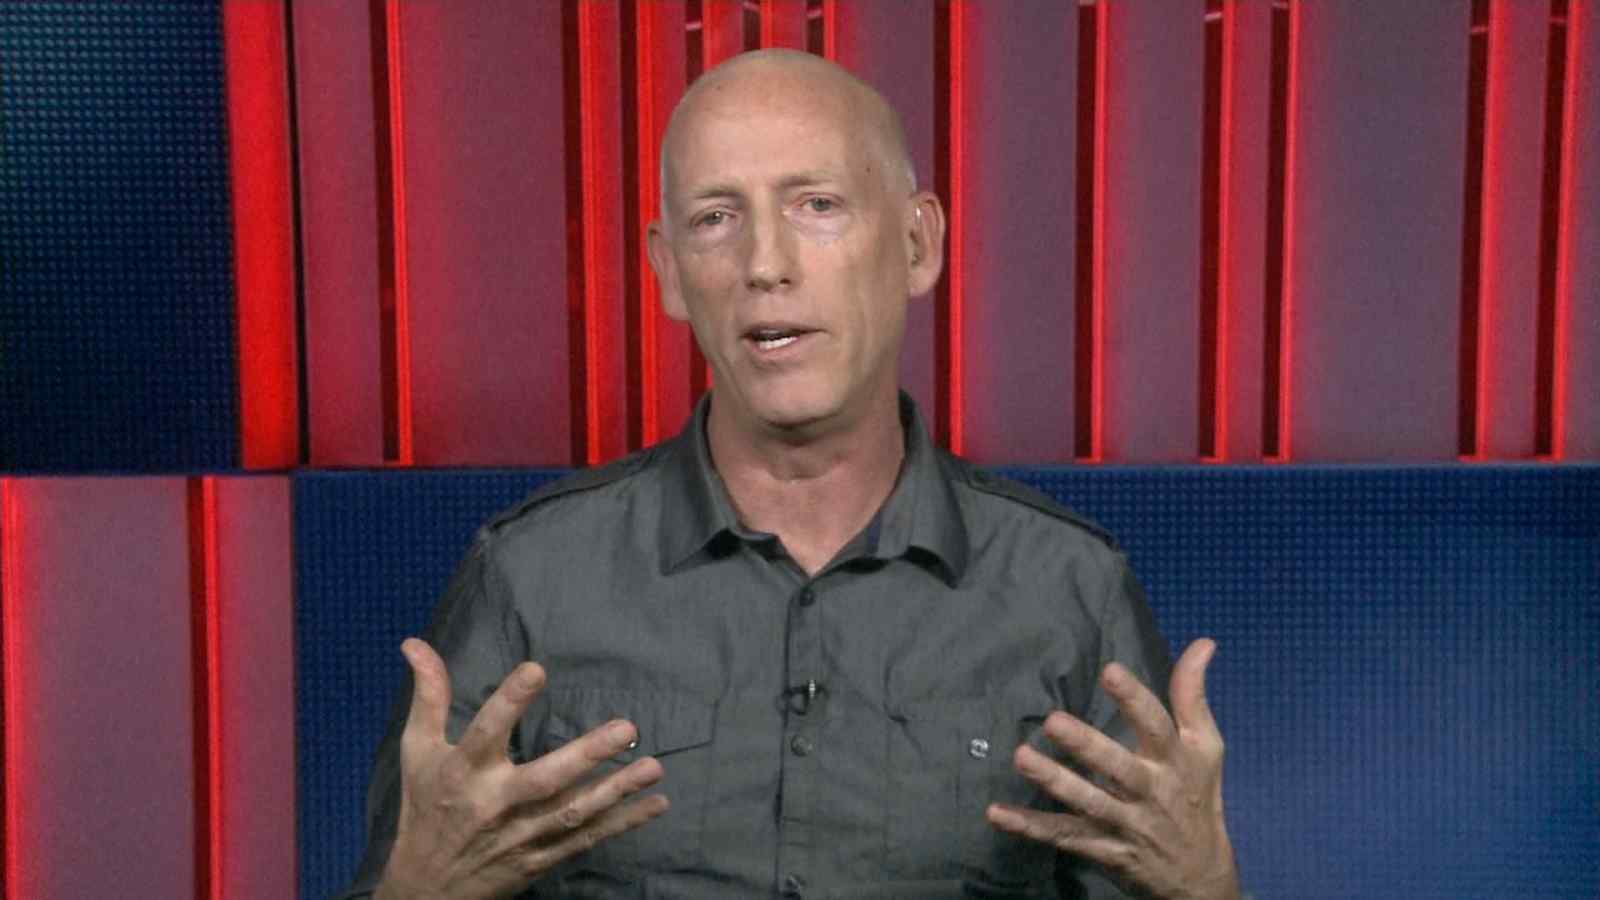 Who is Scott Adams: Dilbert dropped by newspapers over creator’s racist remark